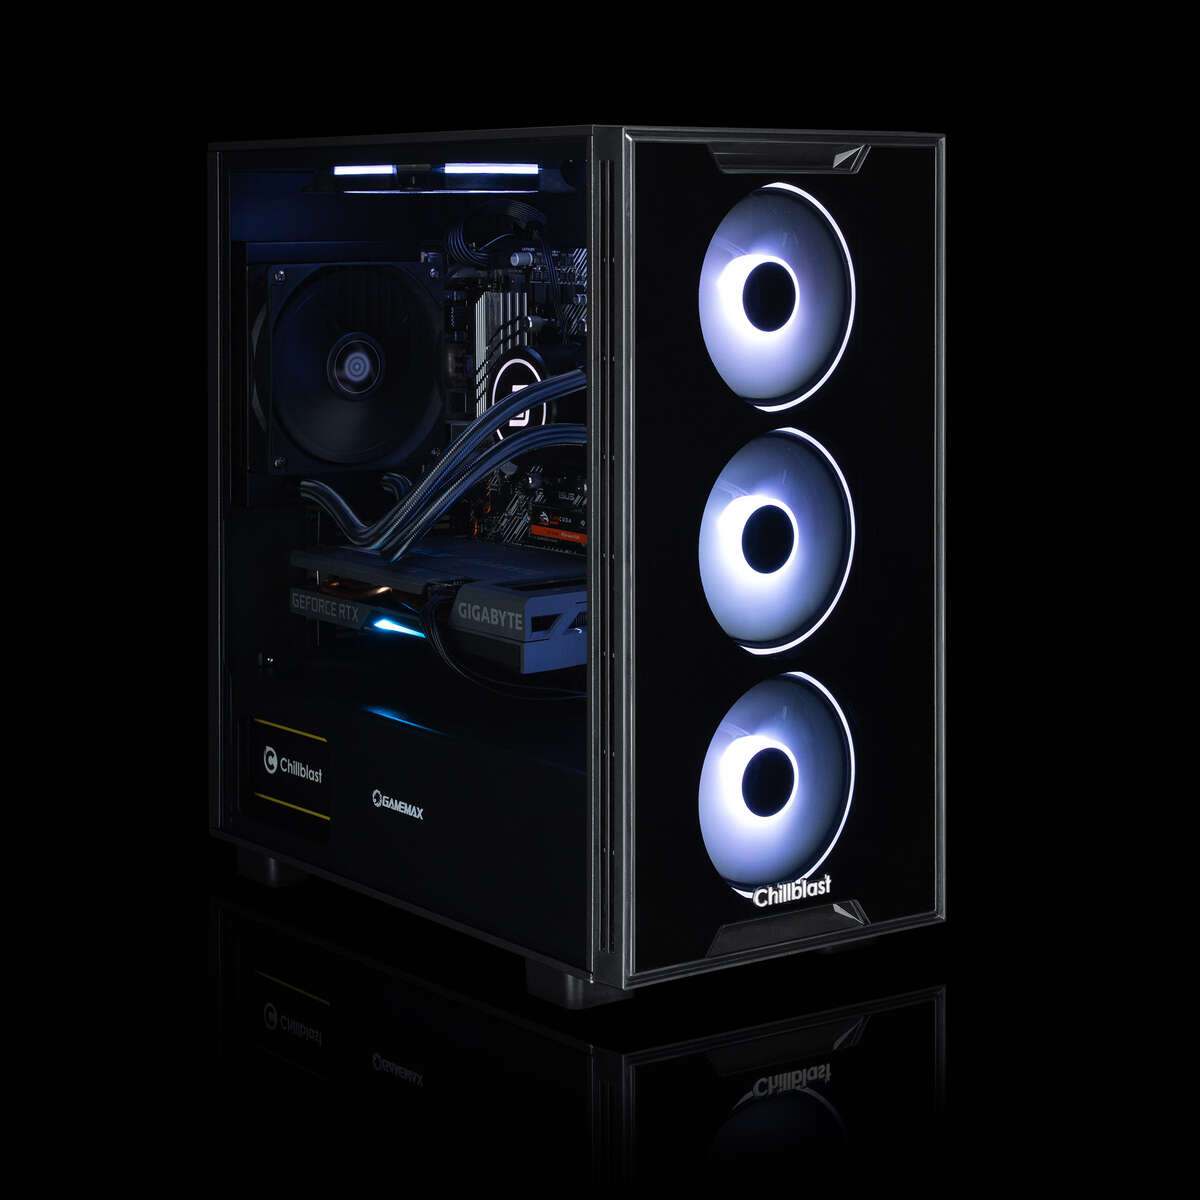 Image of the Fusion Commando RTX 3060 Ti Gaming PC against a black background